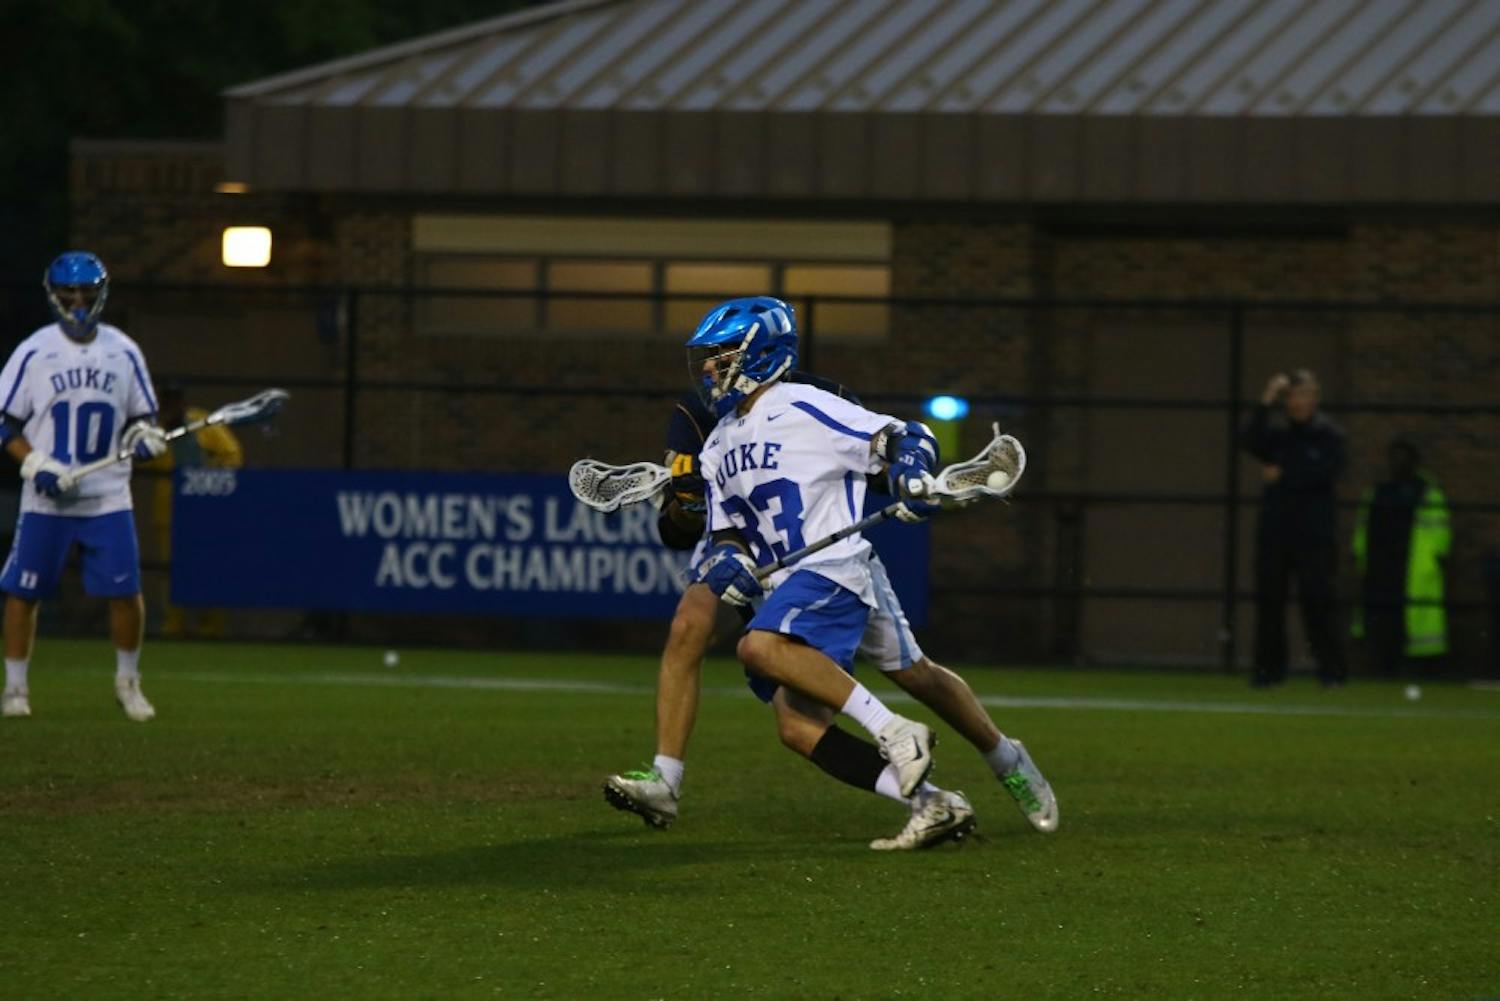 Sophomore Justin Guterding spearheaded the Duke attack against the Golden Eagles, contributing three goals and three assists in a game the Blue Devils had to win.